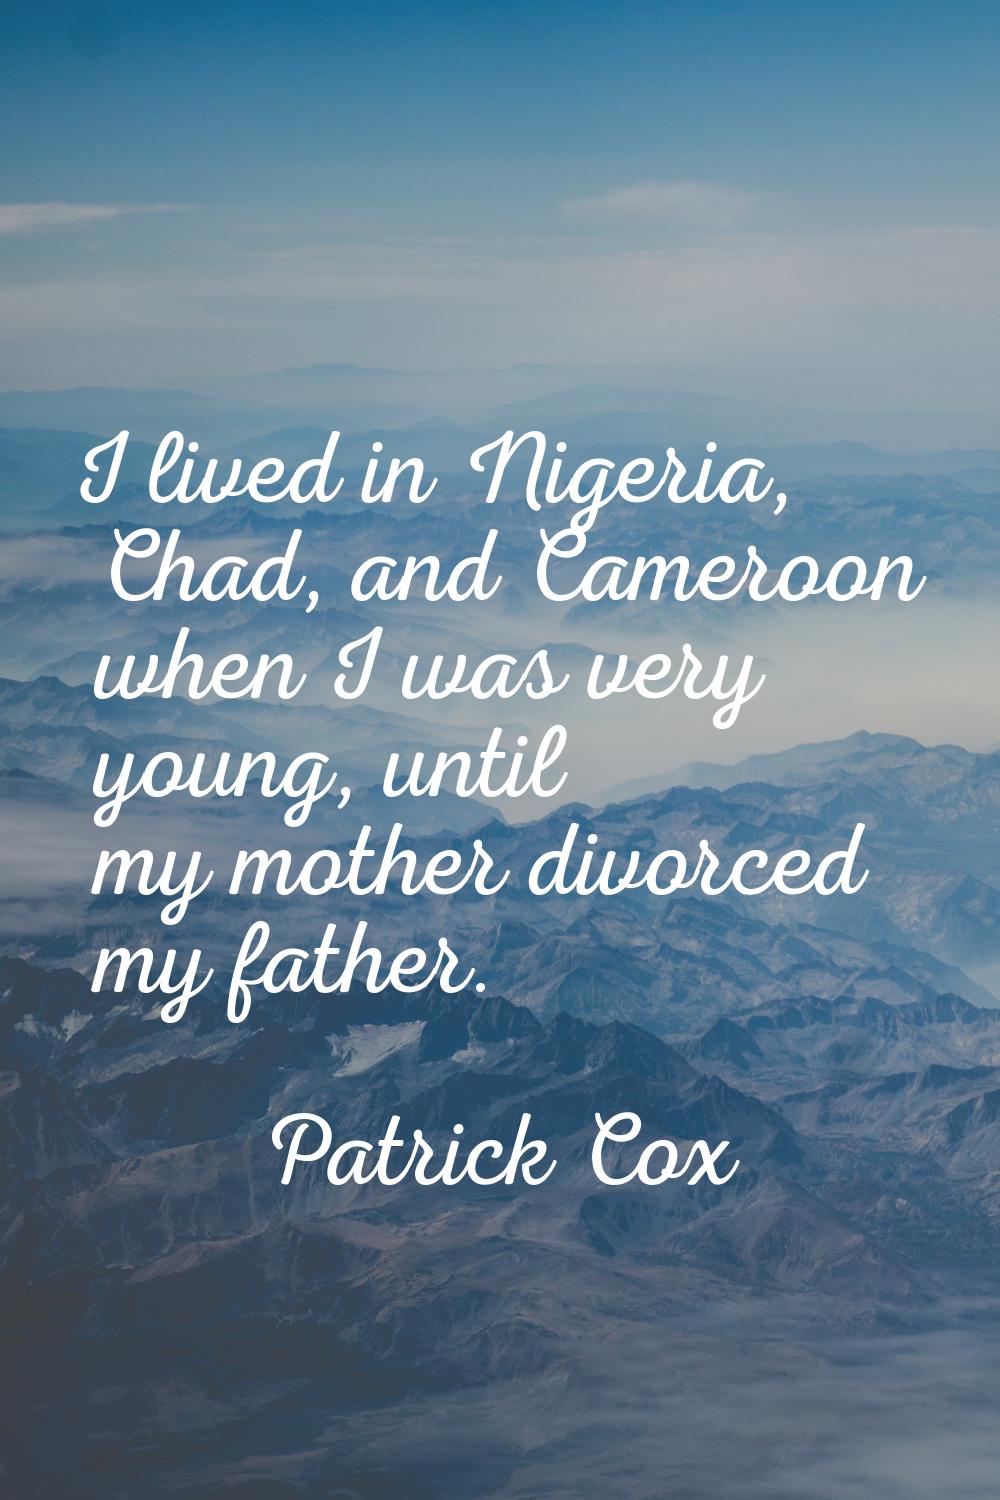 I lived in Nigeria, Chad, and Cameroon when I was very young, until my mother divorced my father.